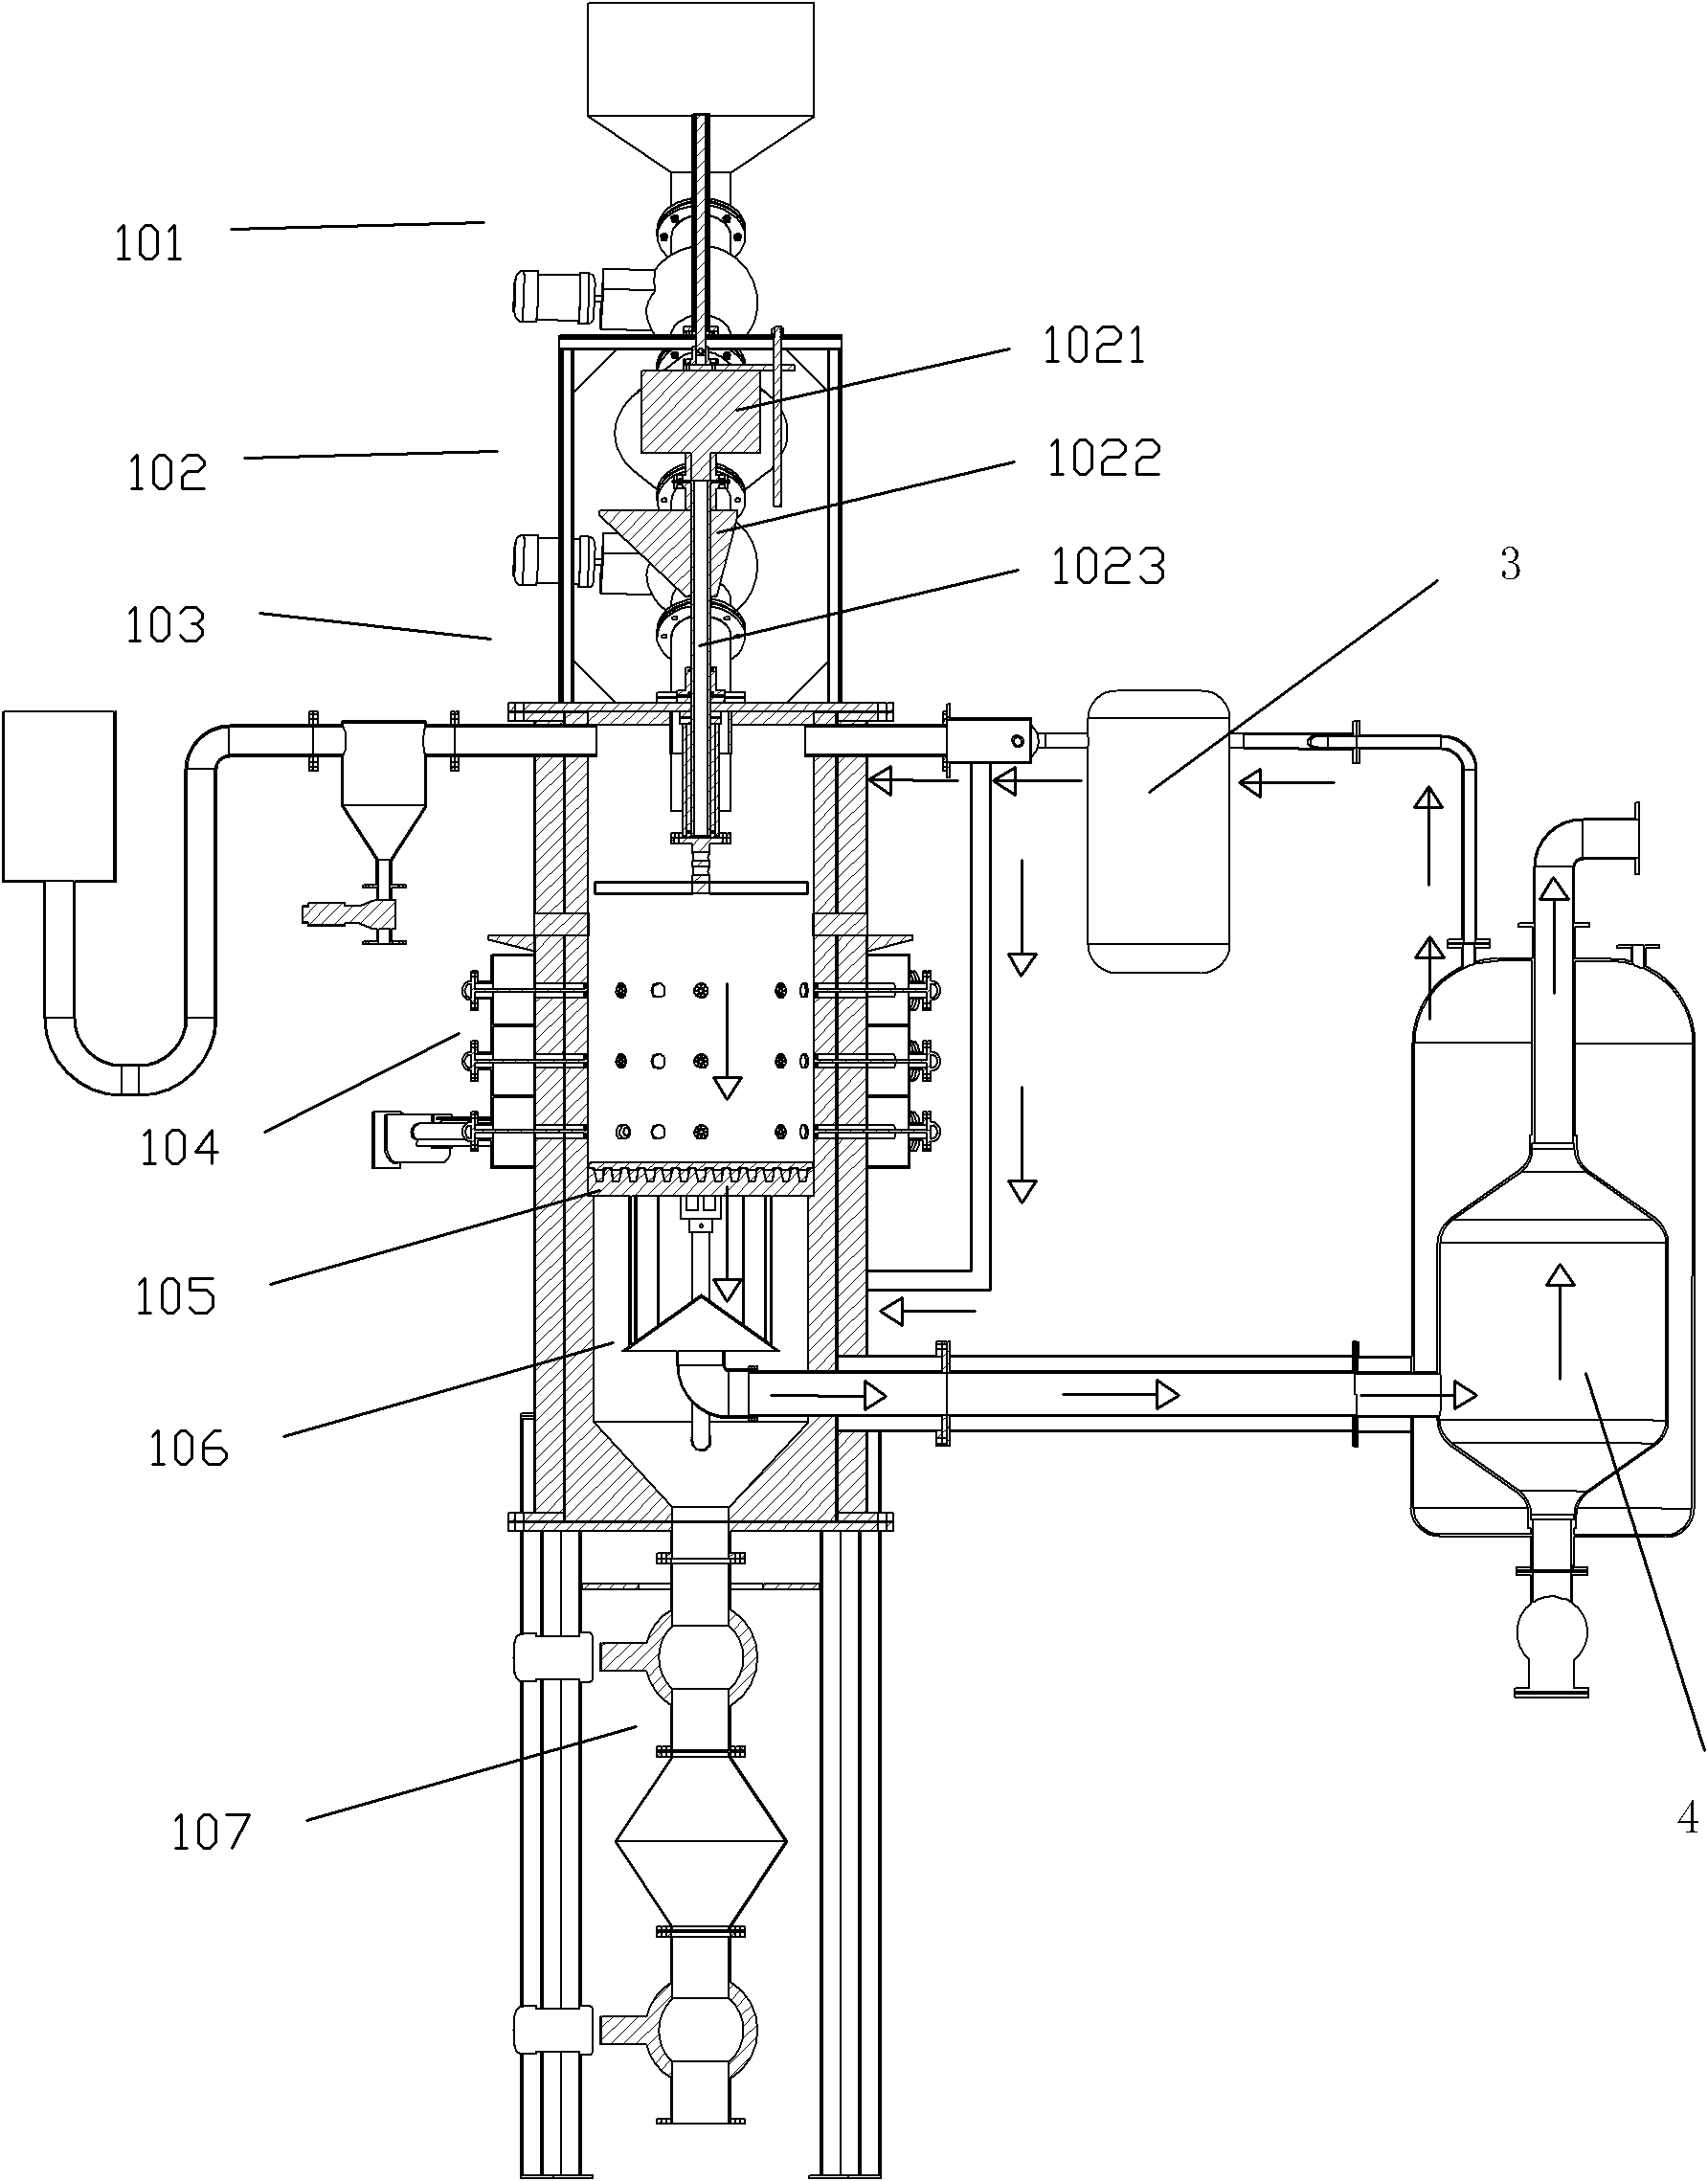 Control method for biomass gasification equipment